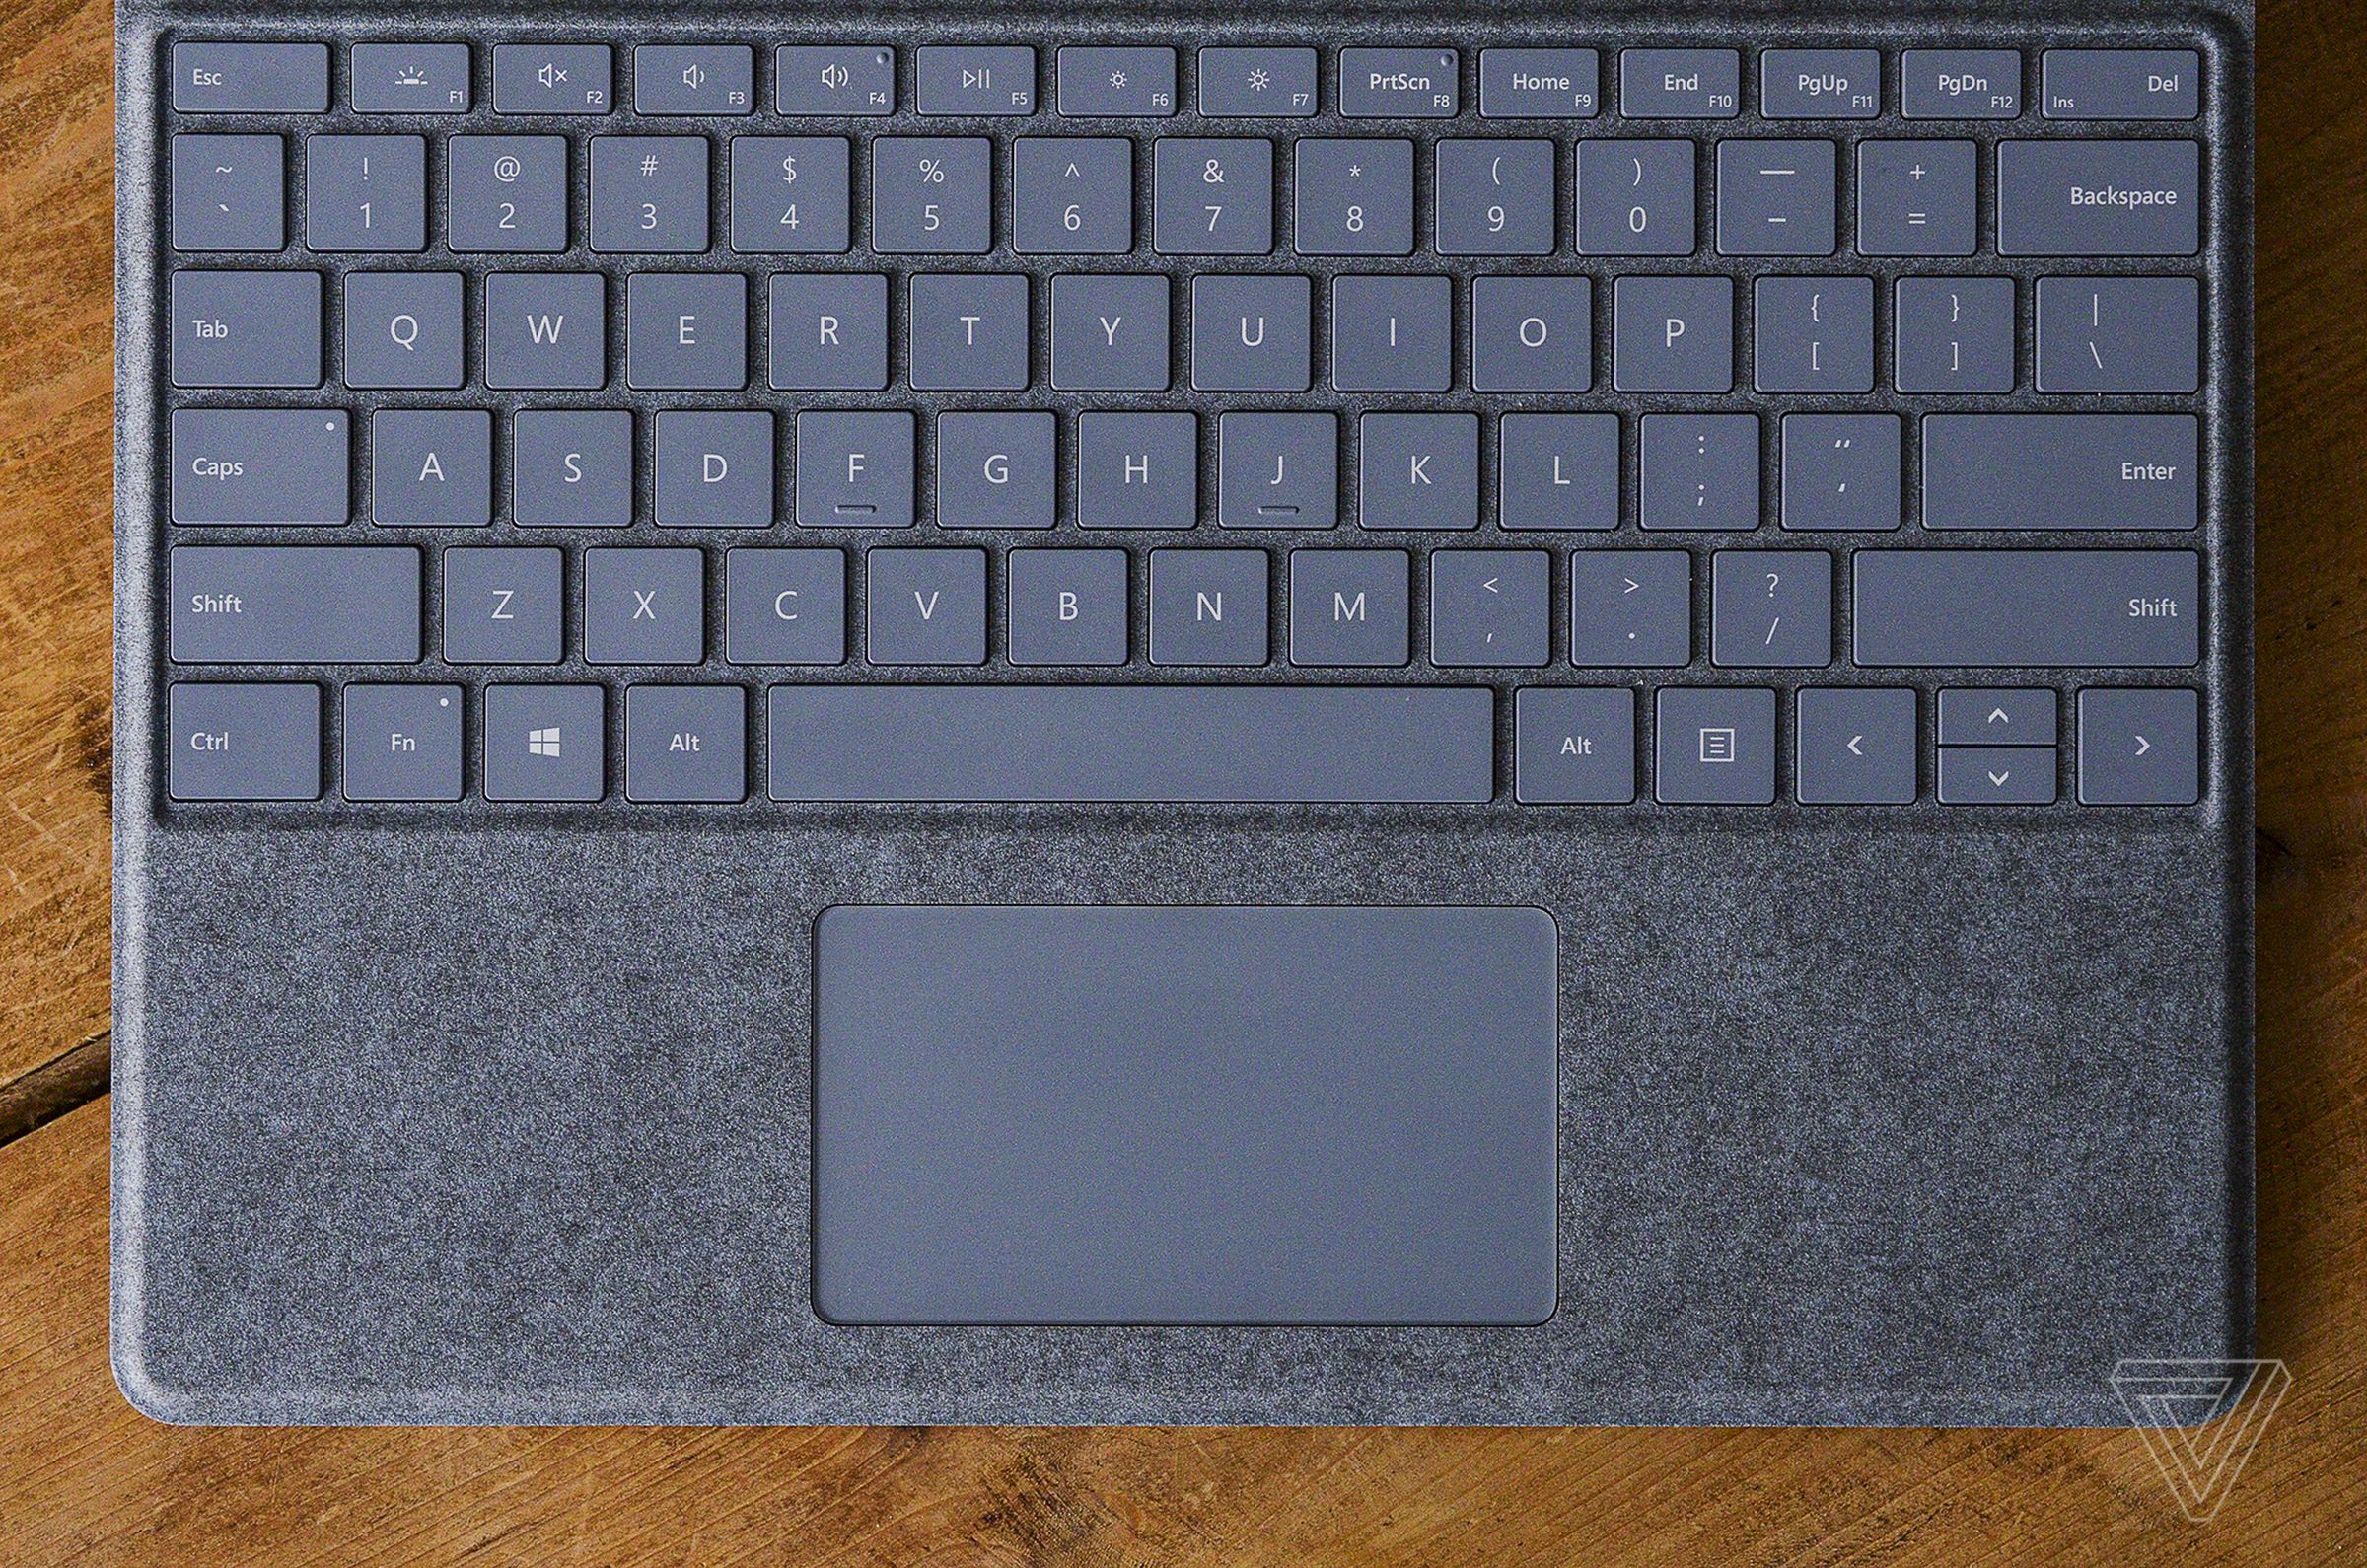 Microsoft’s Signature Keyboard is available separately.